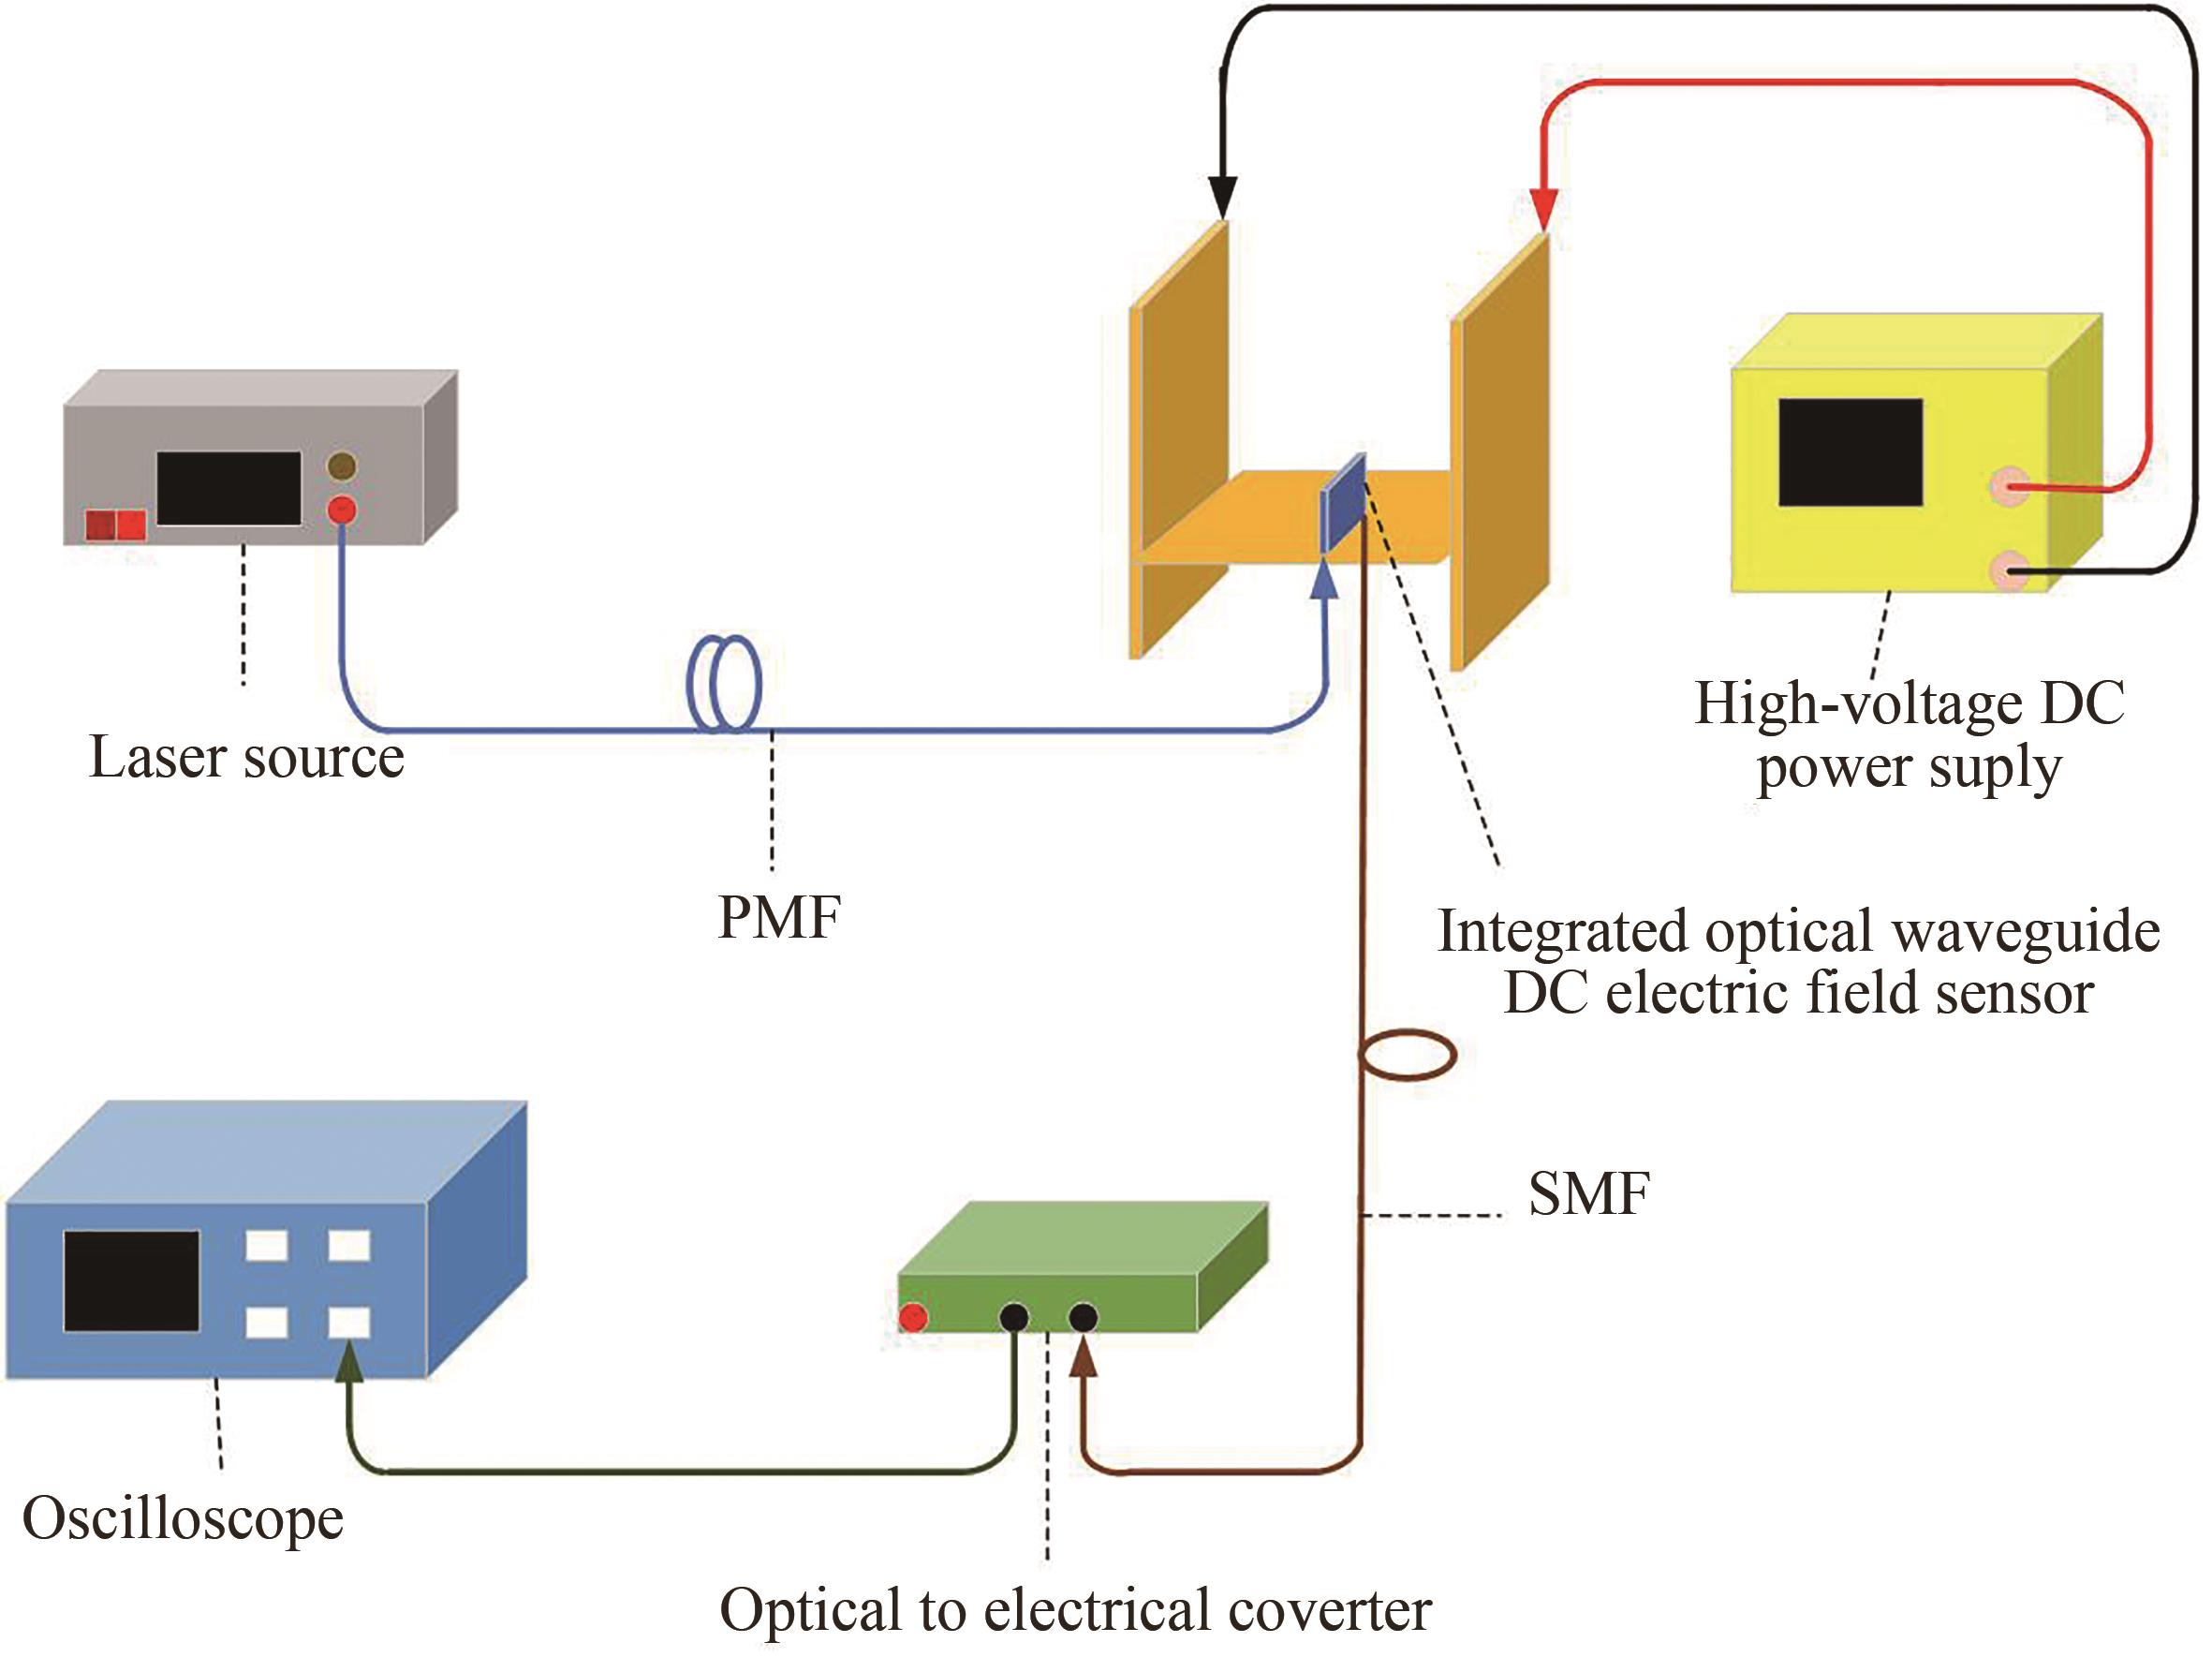 Schematic of the integrated optical waveguide DC electric field sensor system